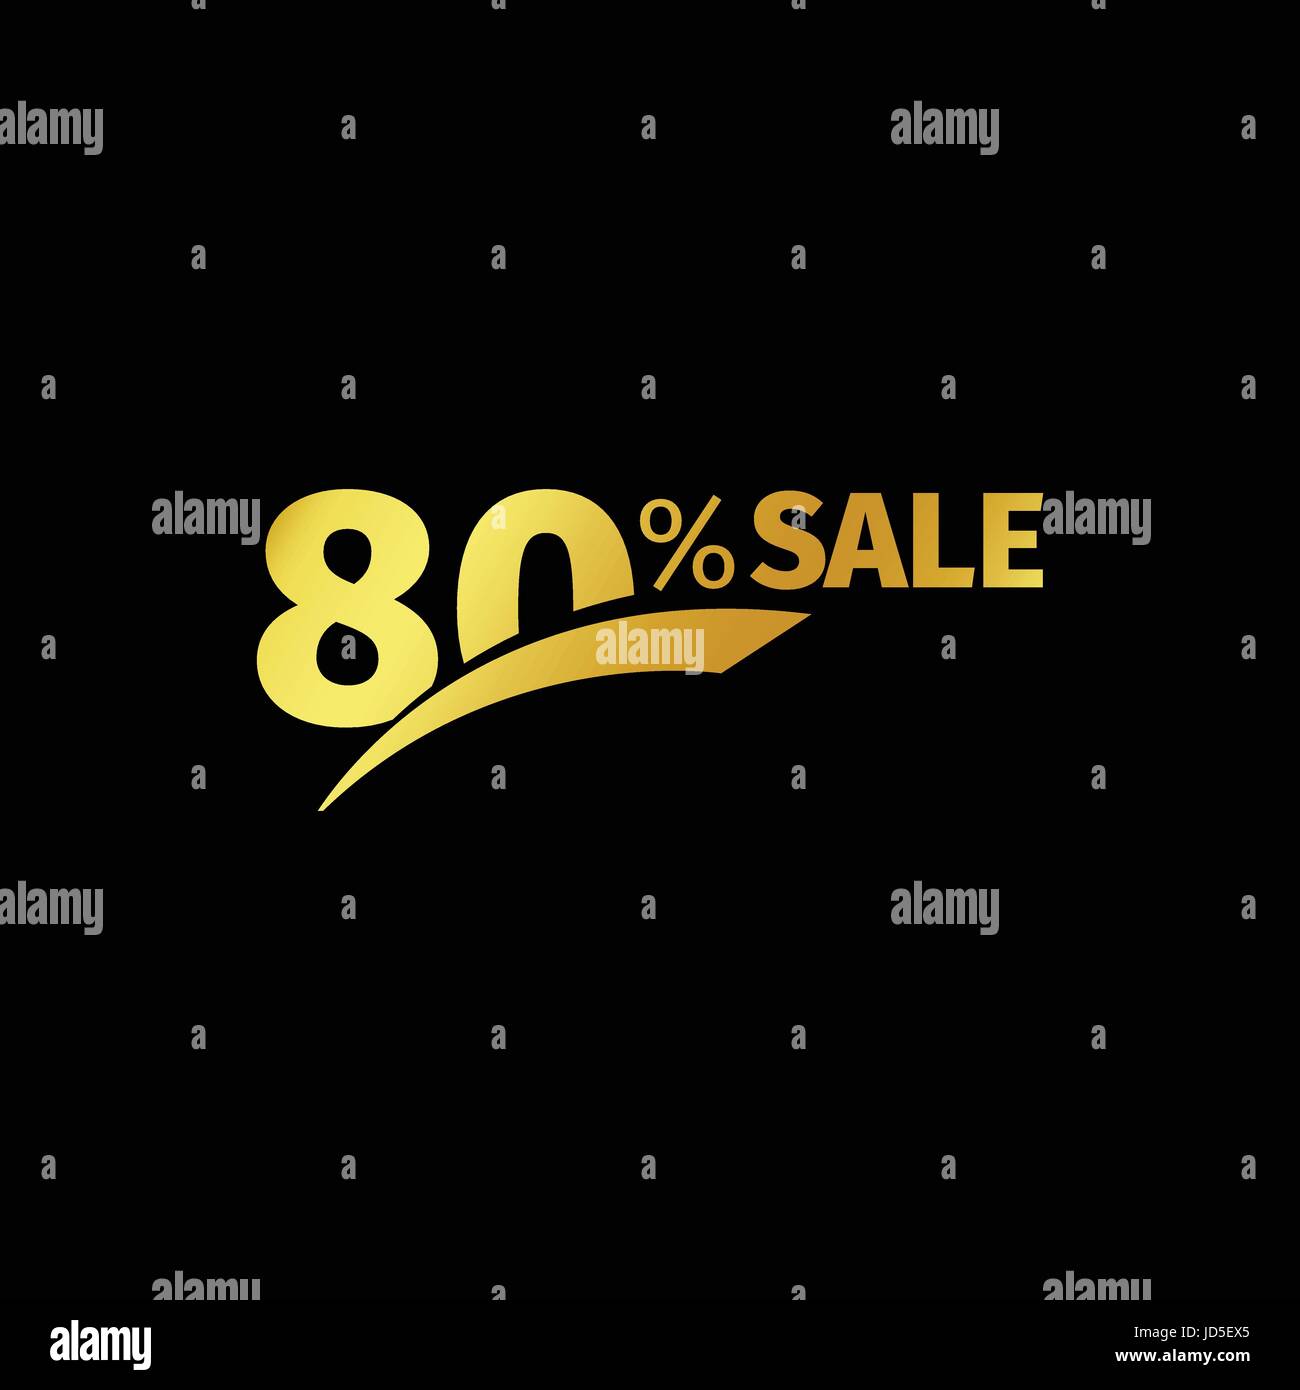 Black banner discount purchase 80 percent sale vector gold logo on a black background. Promotional business offer for buyers logotype. Eighty percenta Stock Vector